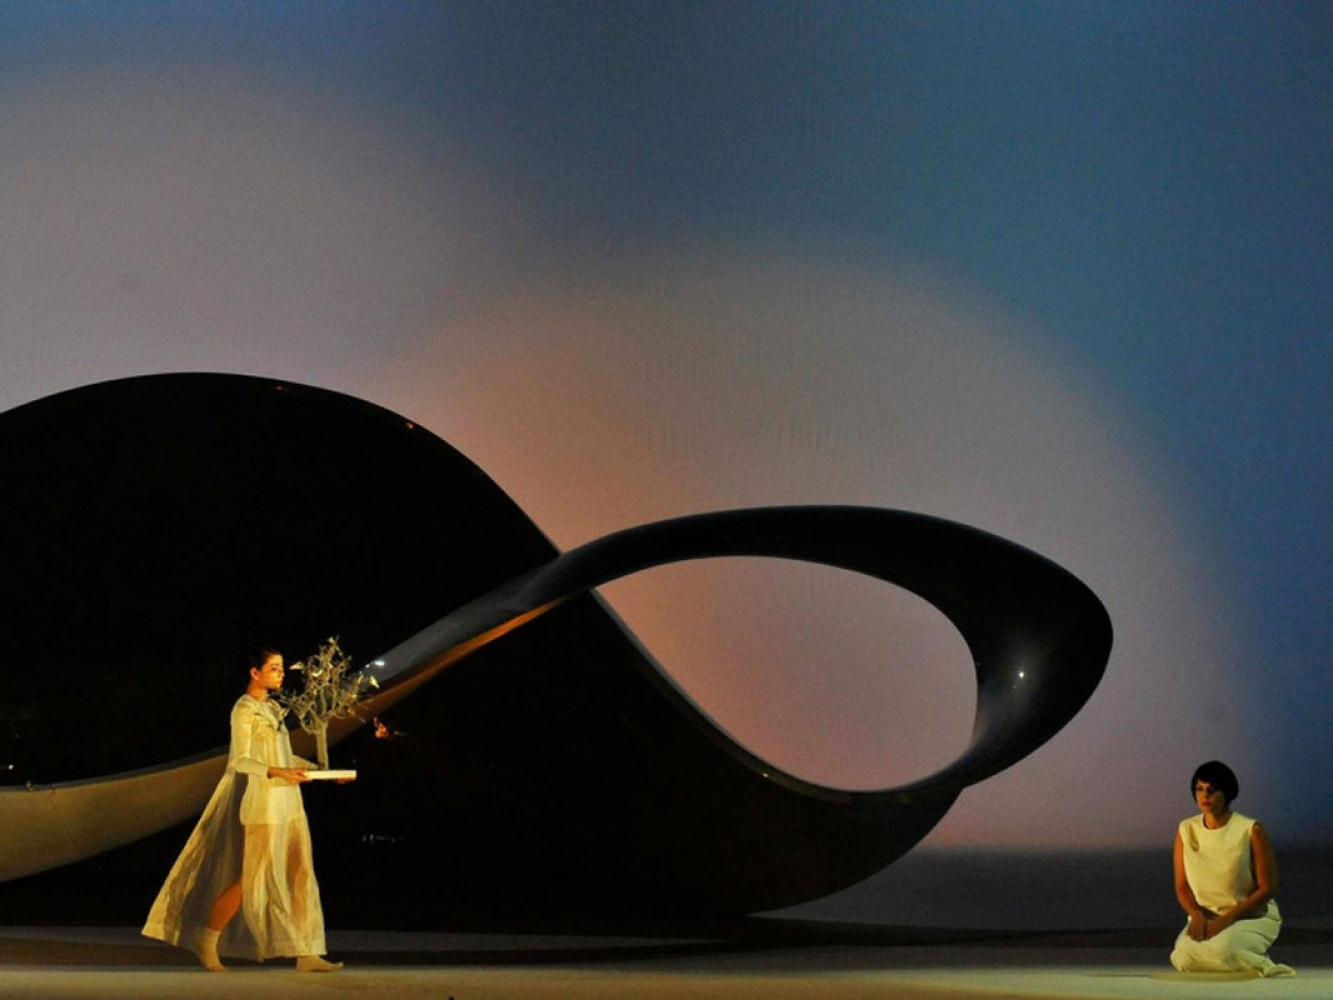 “Madama Butterfly” by Giacomo Puccini at La Fenice Theatre